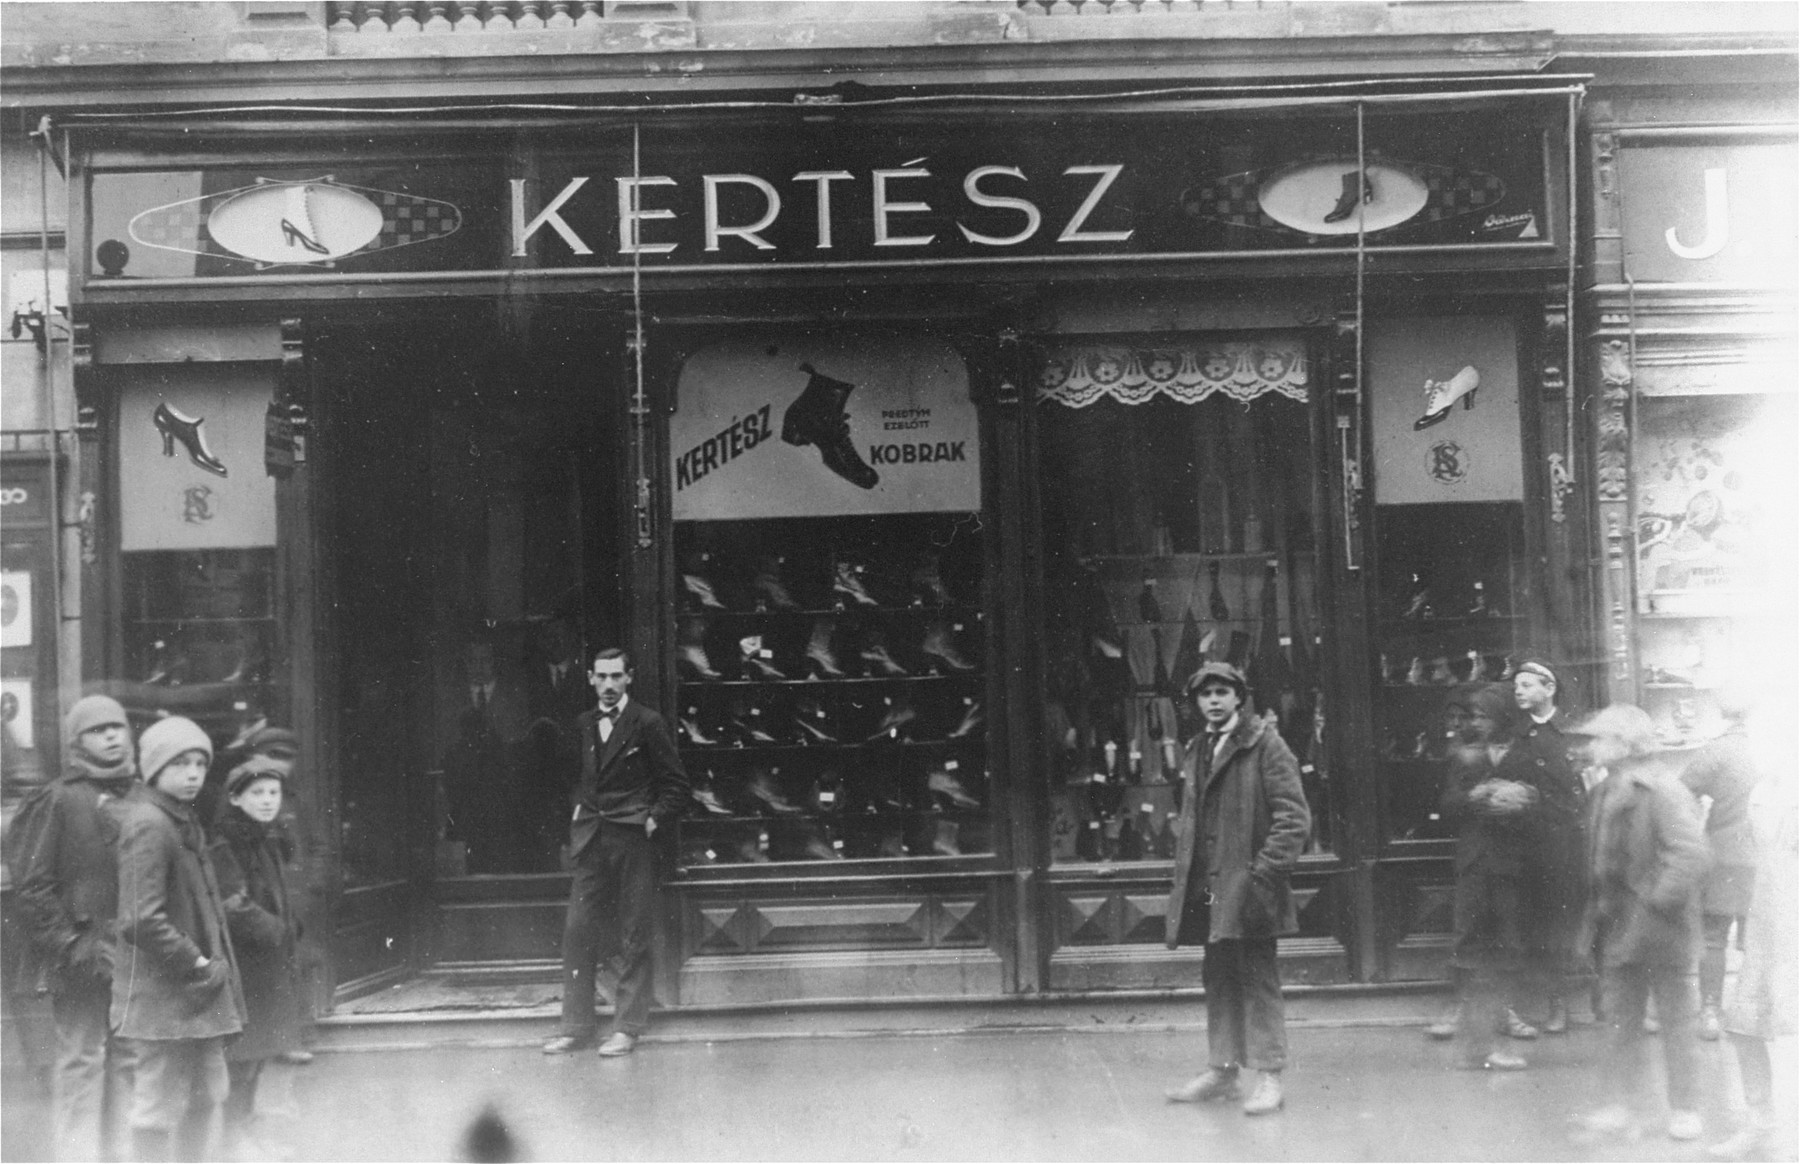 View of the Kertesz shoe store in Kosice, Slovakia, owned by the Jewish businessman, Samuel Kertesz. 

Samuel Kertesz, who is the maternal grandfather of Eva (Halmos) Kuhn, perished in Auschwitz in 1944.